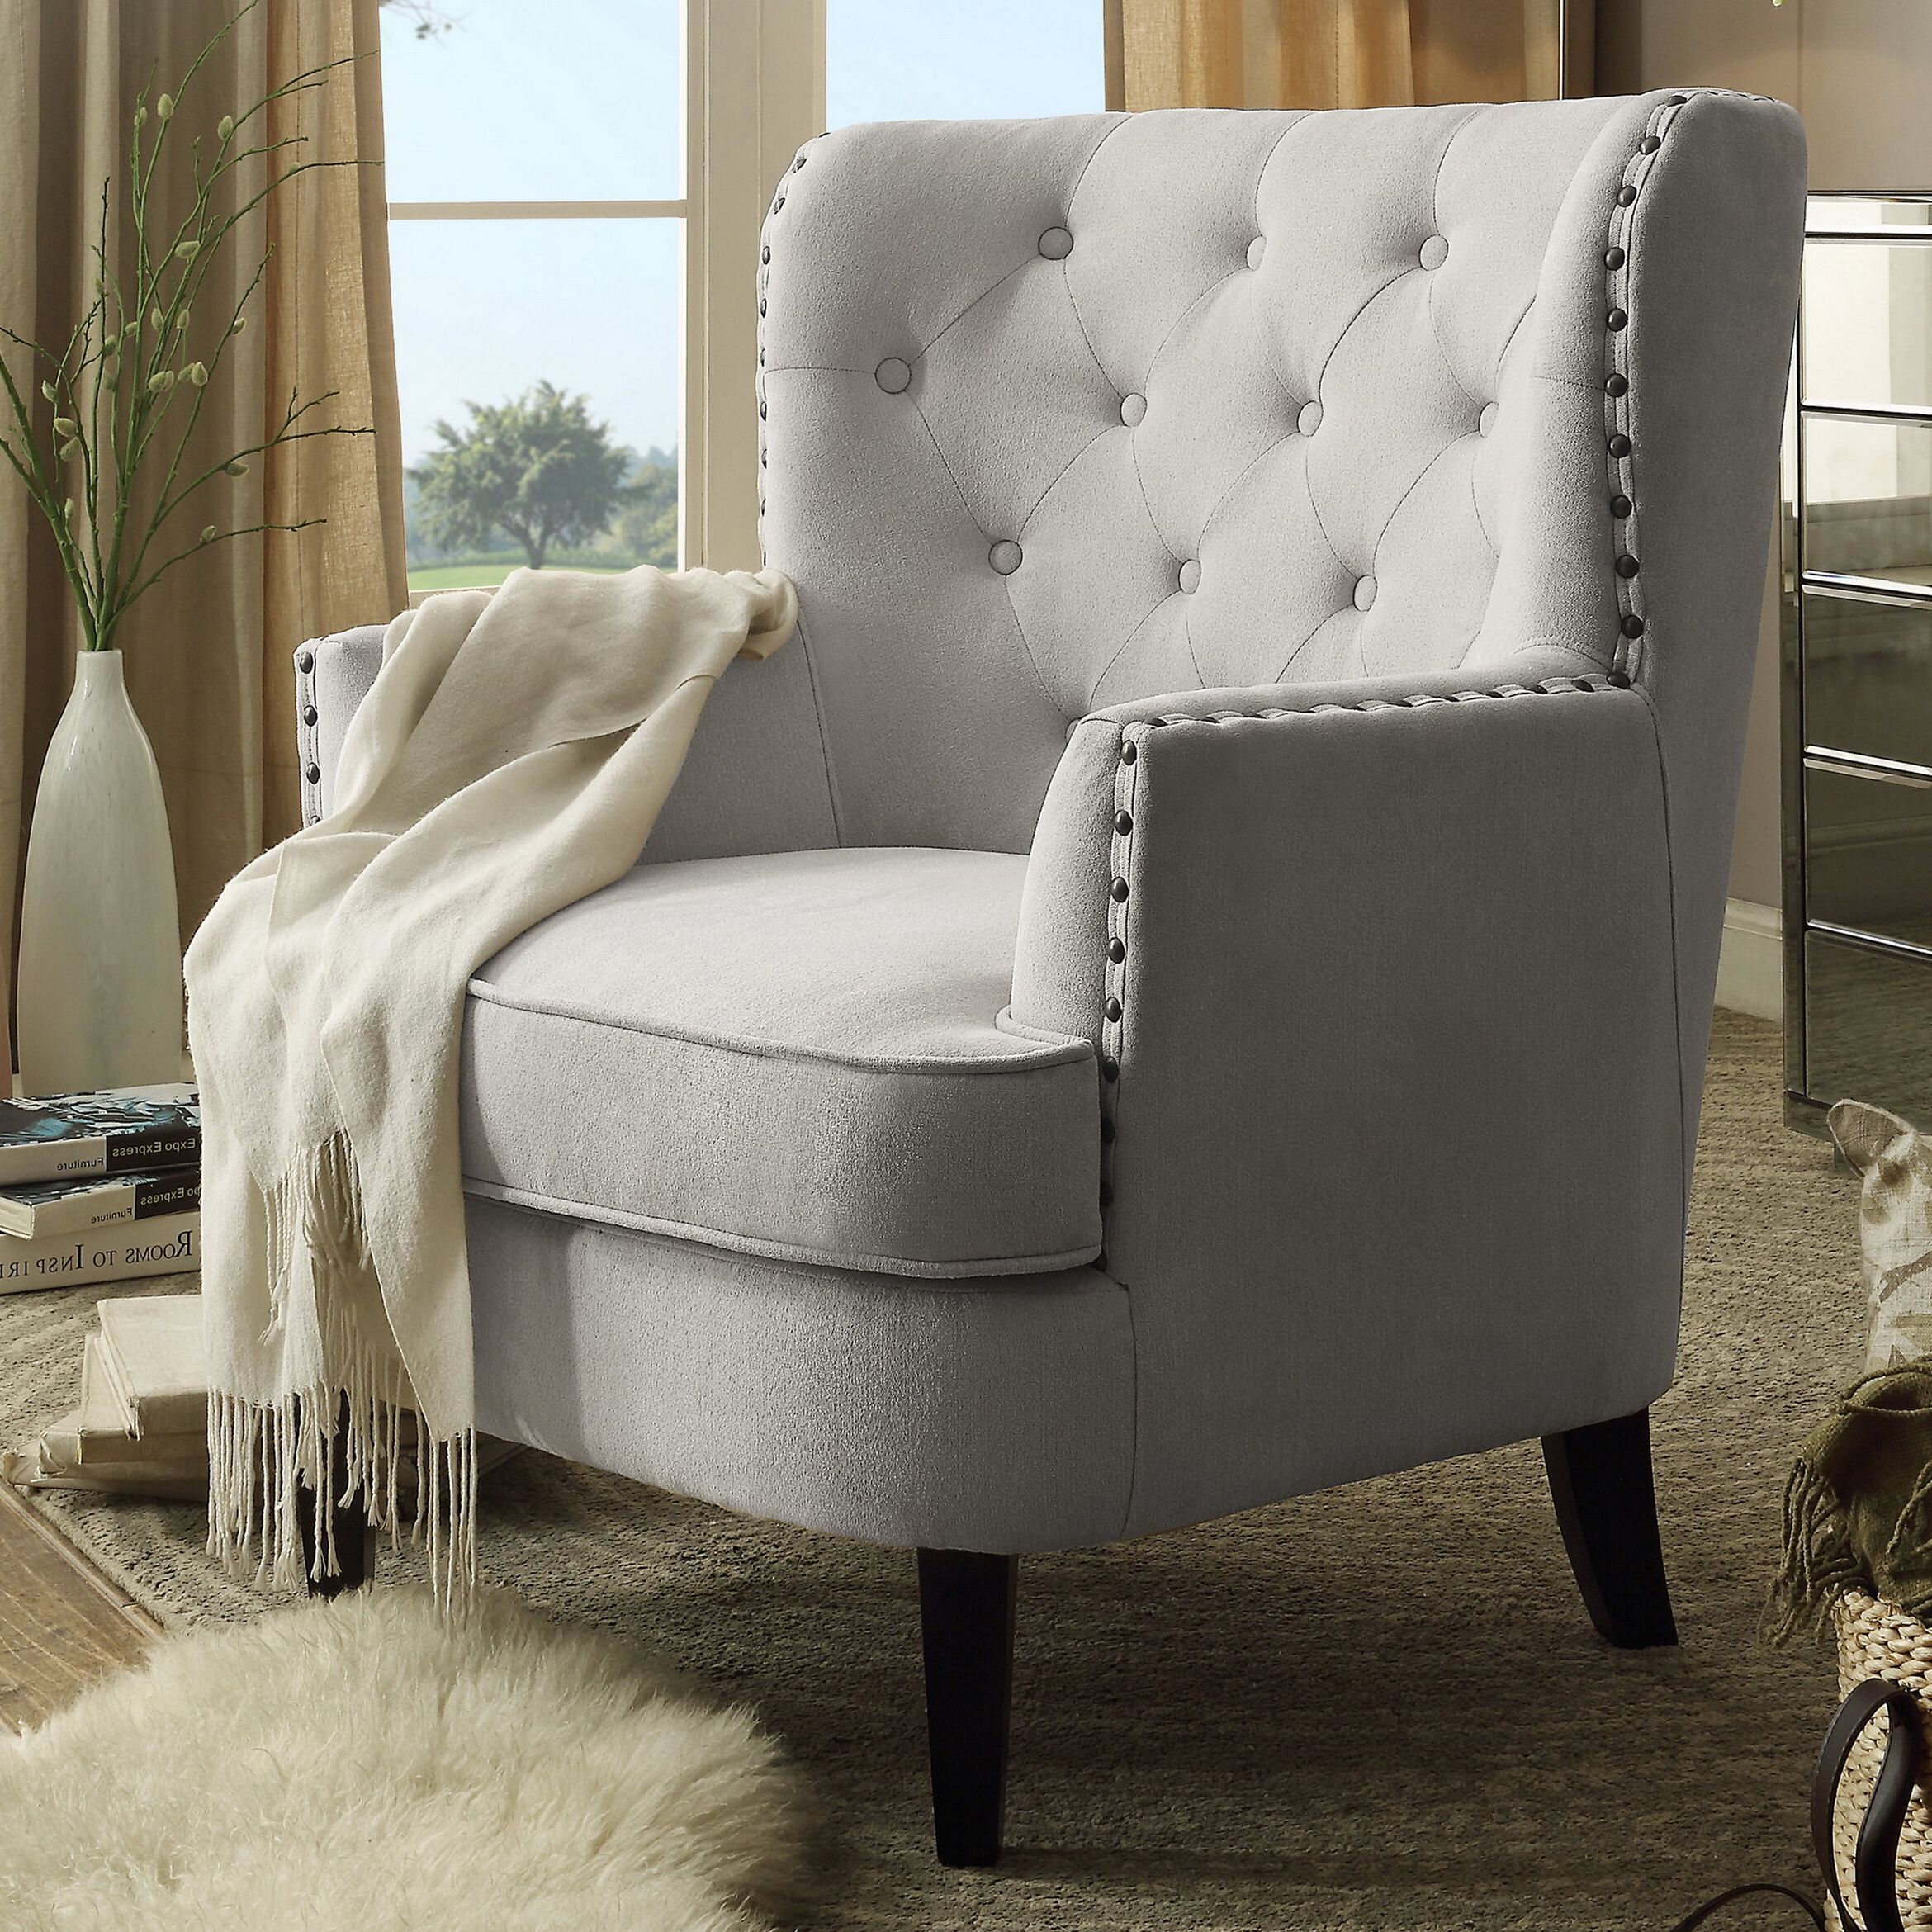 Lenaghan Wingback Chairs In Fashionable Lenaghan Wingback Chair (View 1 of 20)